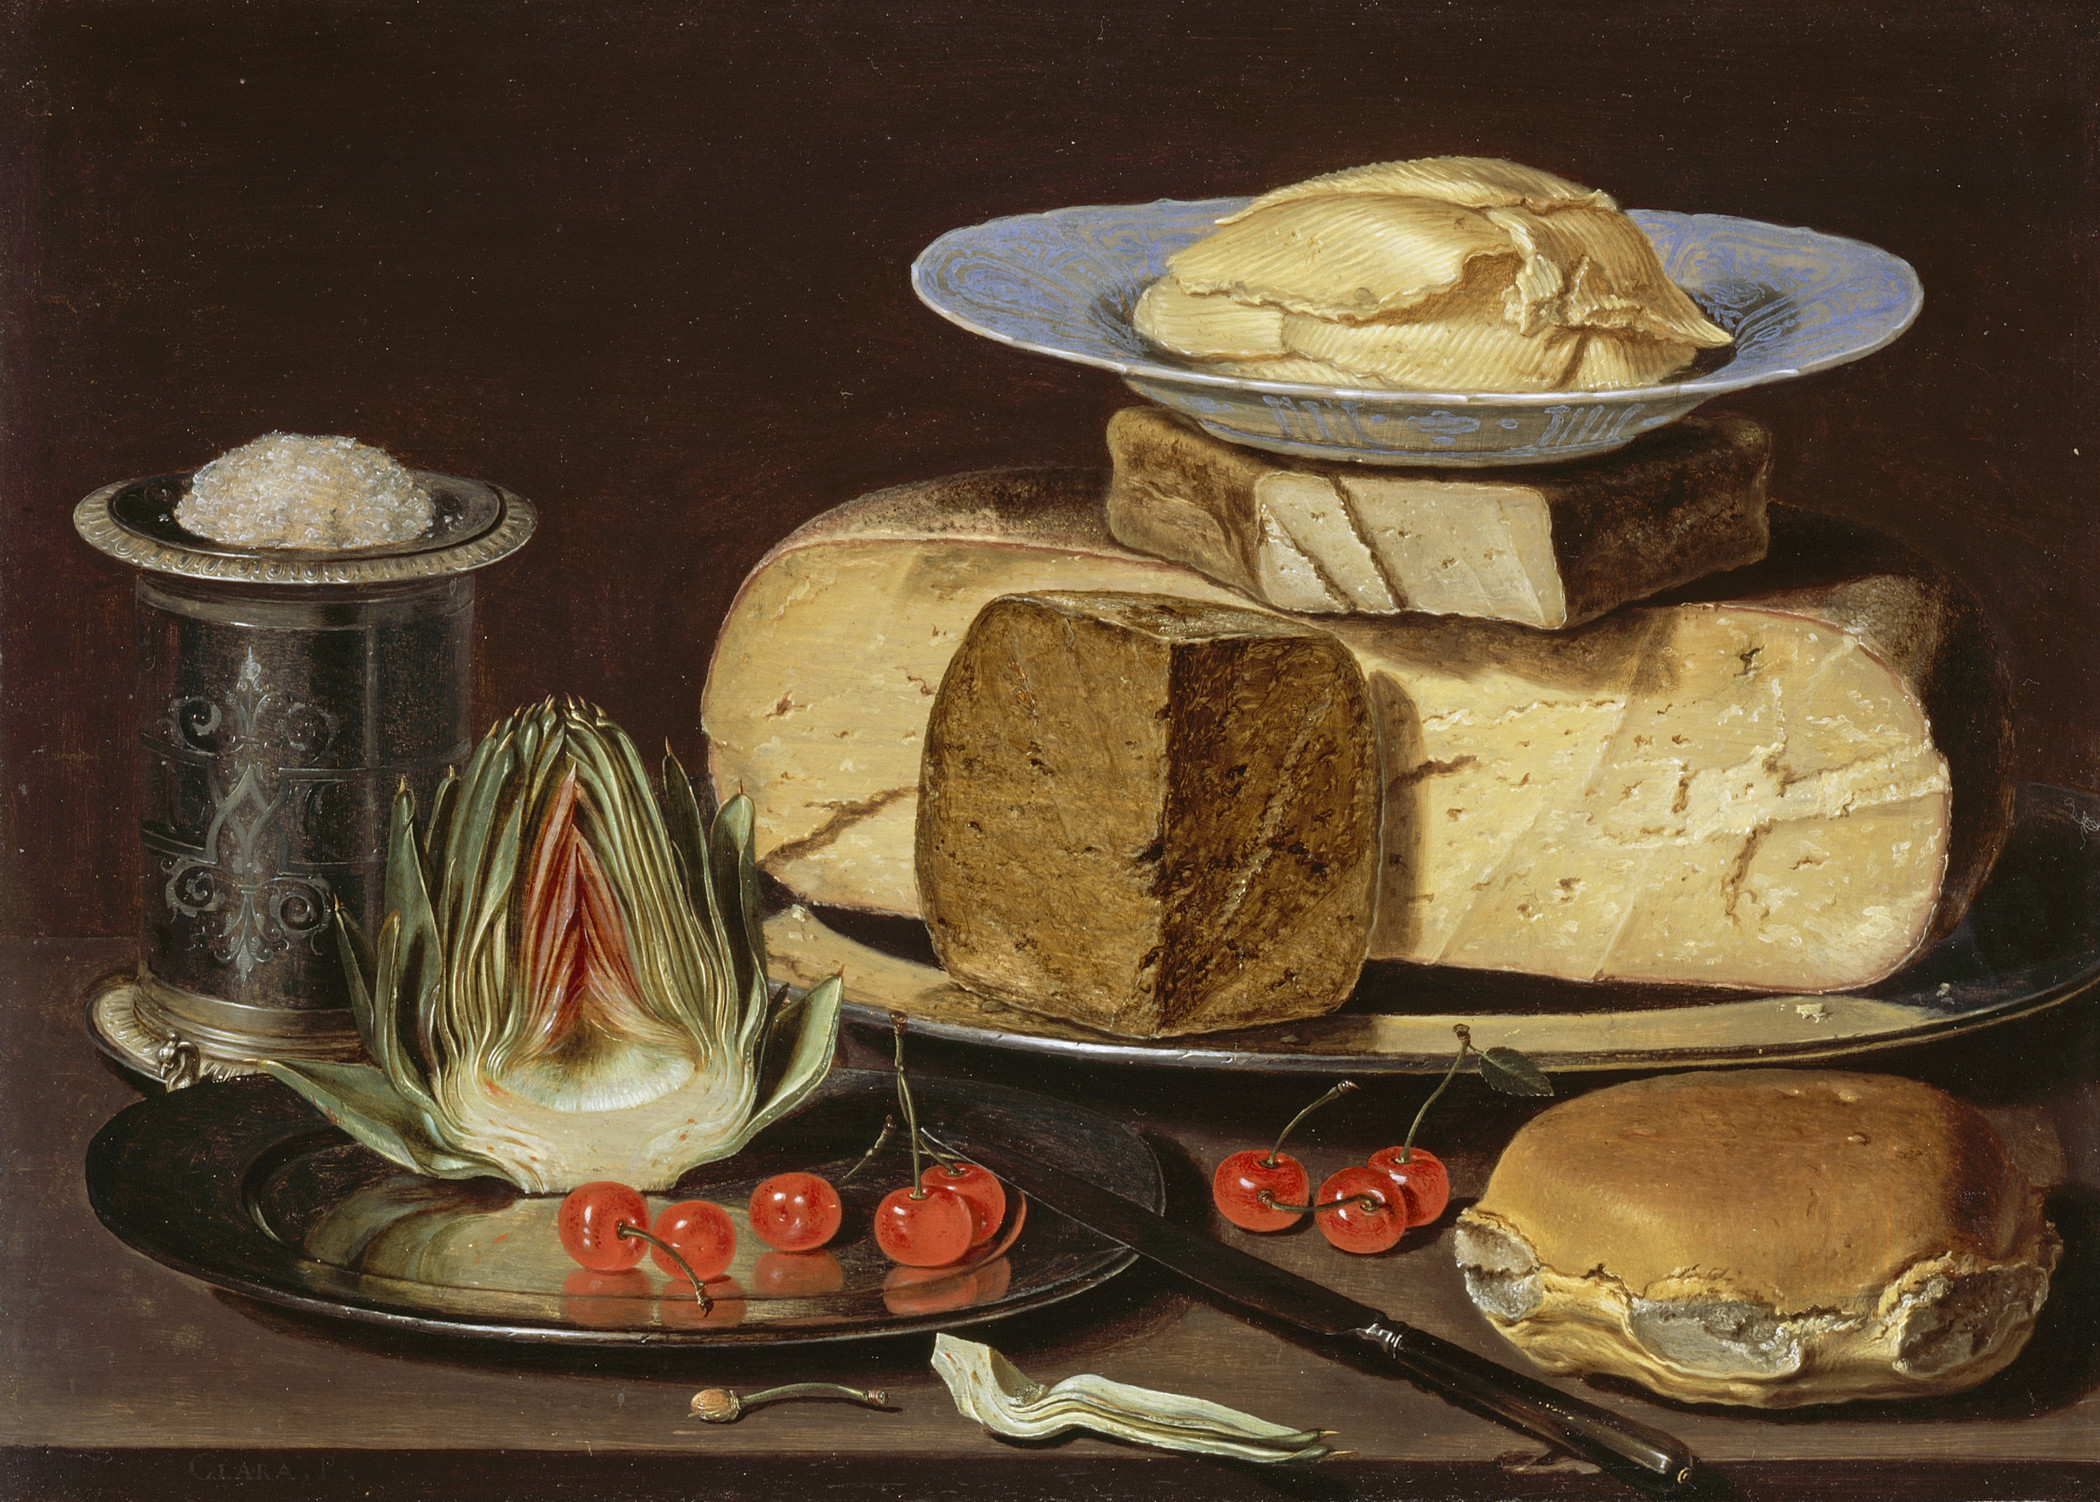 Painting of bread, cheese, fruit piled together against a brown background